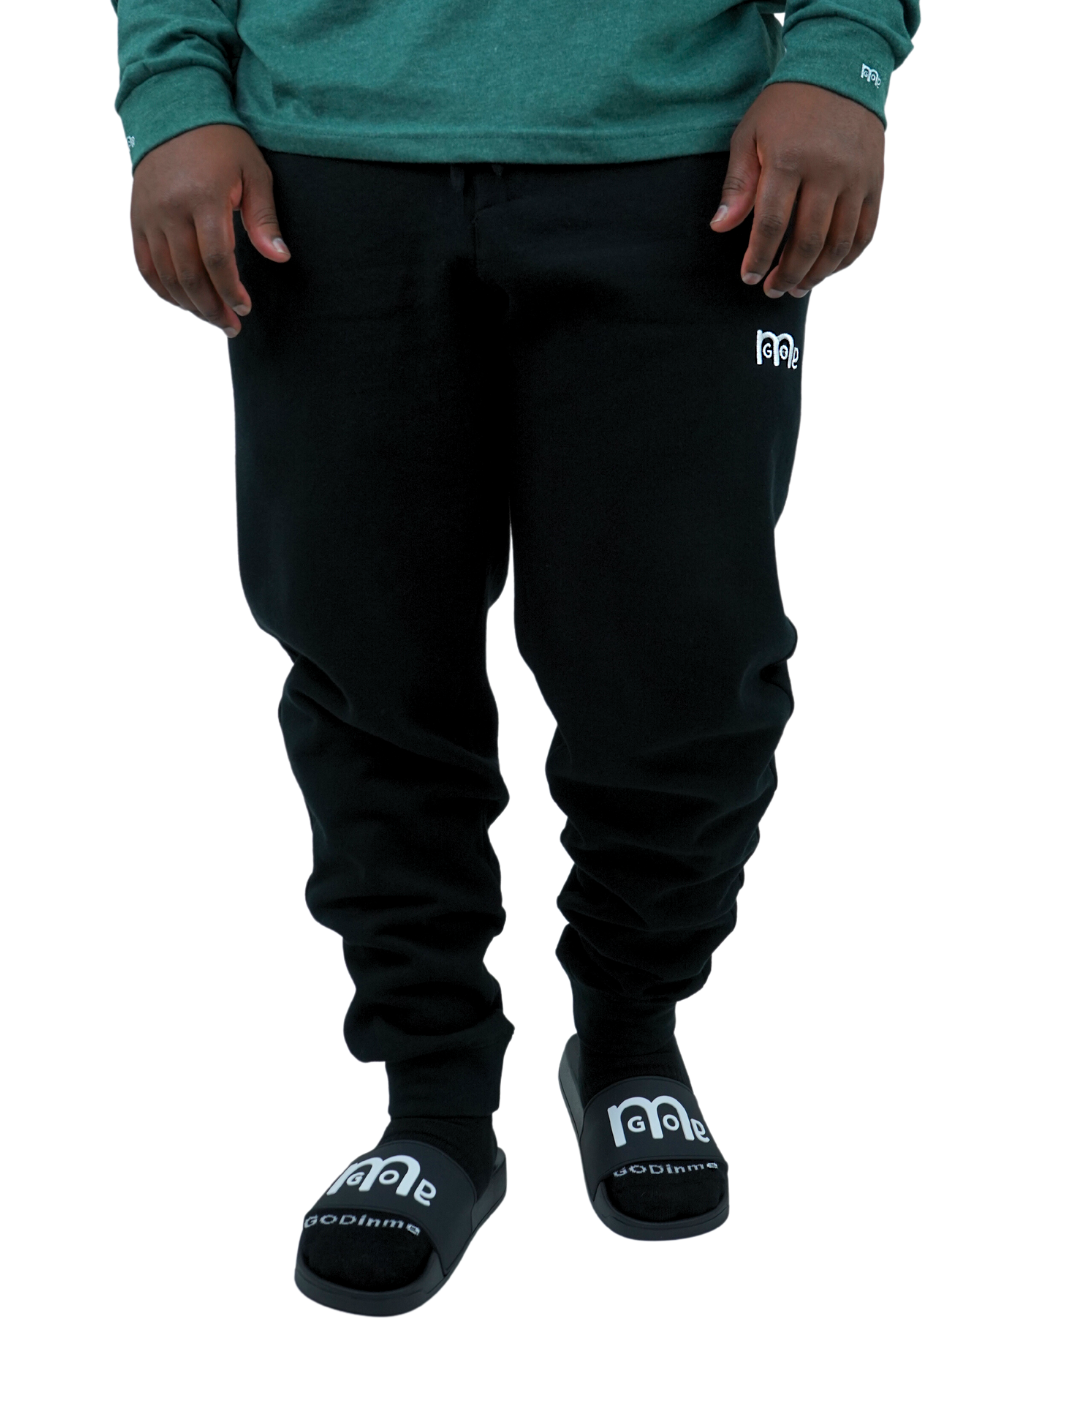 Experience the ultimate comfort in Men's joggers with GODinme! Made with premium quality fabric, these Black GODinme sweat pants offer an elastic waistband for that perfectly relaxed fit. Featuring ribbing ankle cuffs, sewn eyelets, and the signature GODinme logo (in White) at left leg.